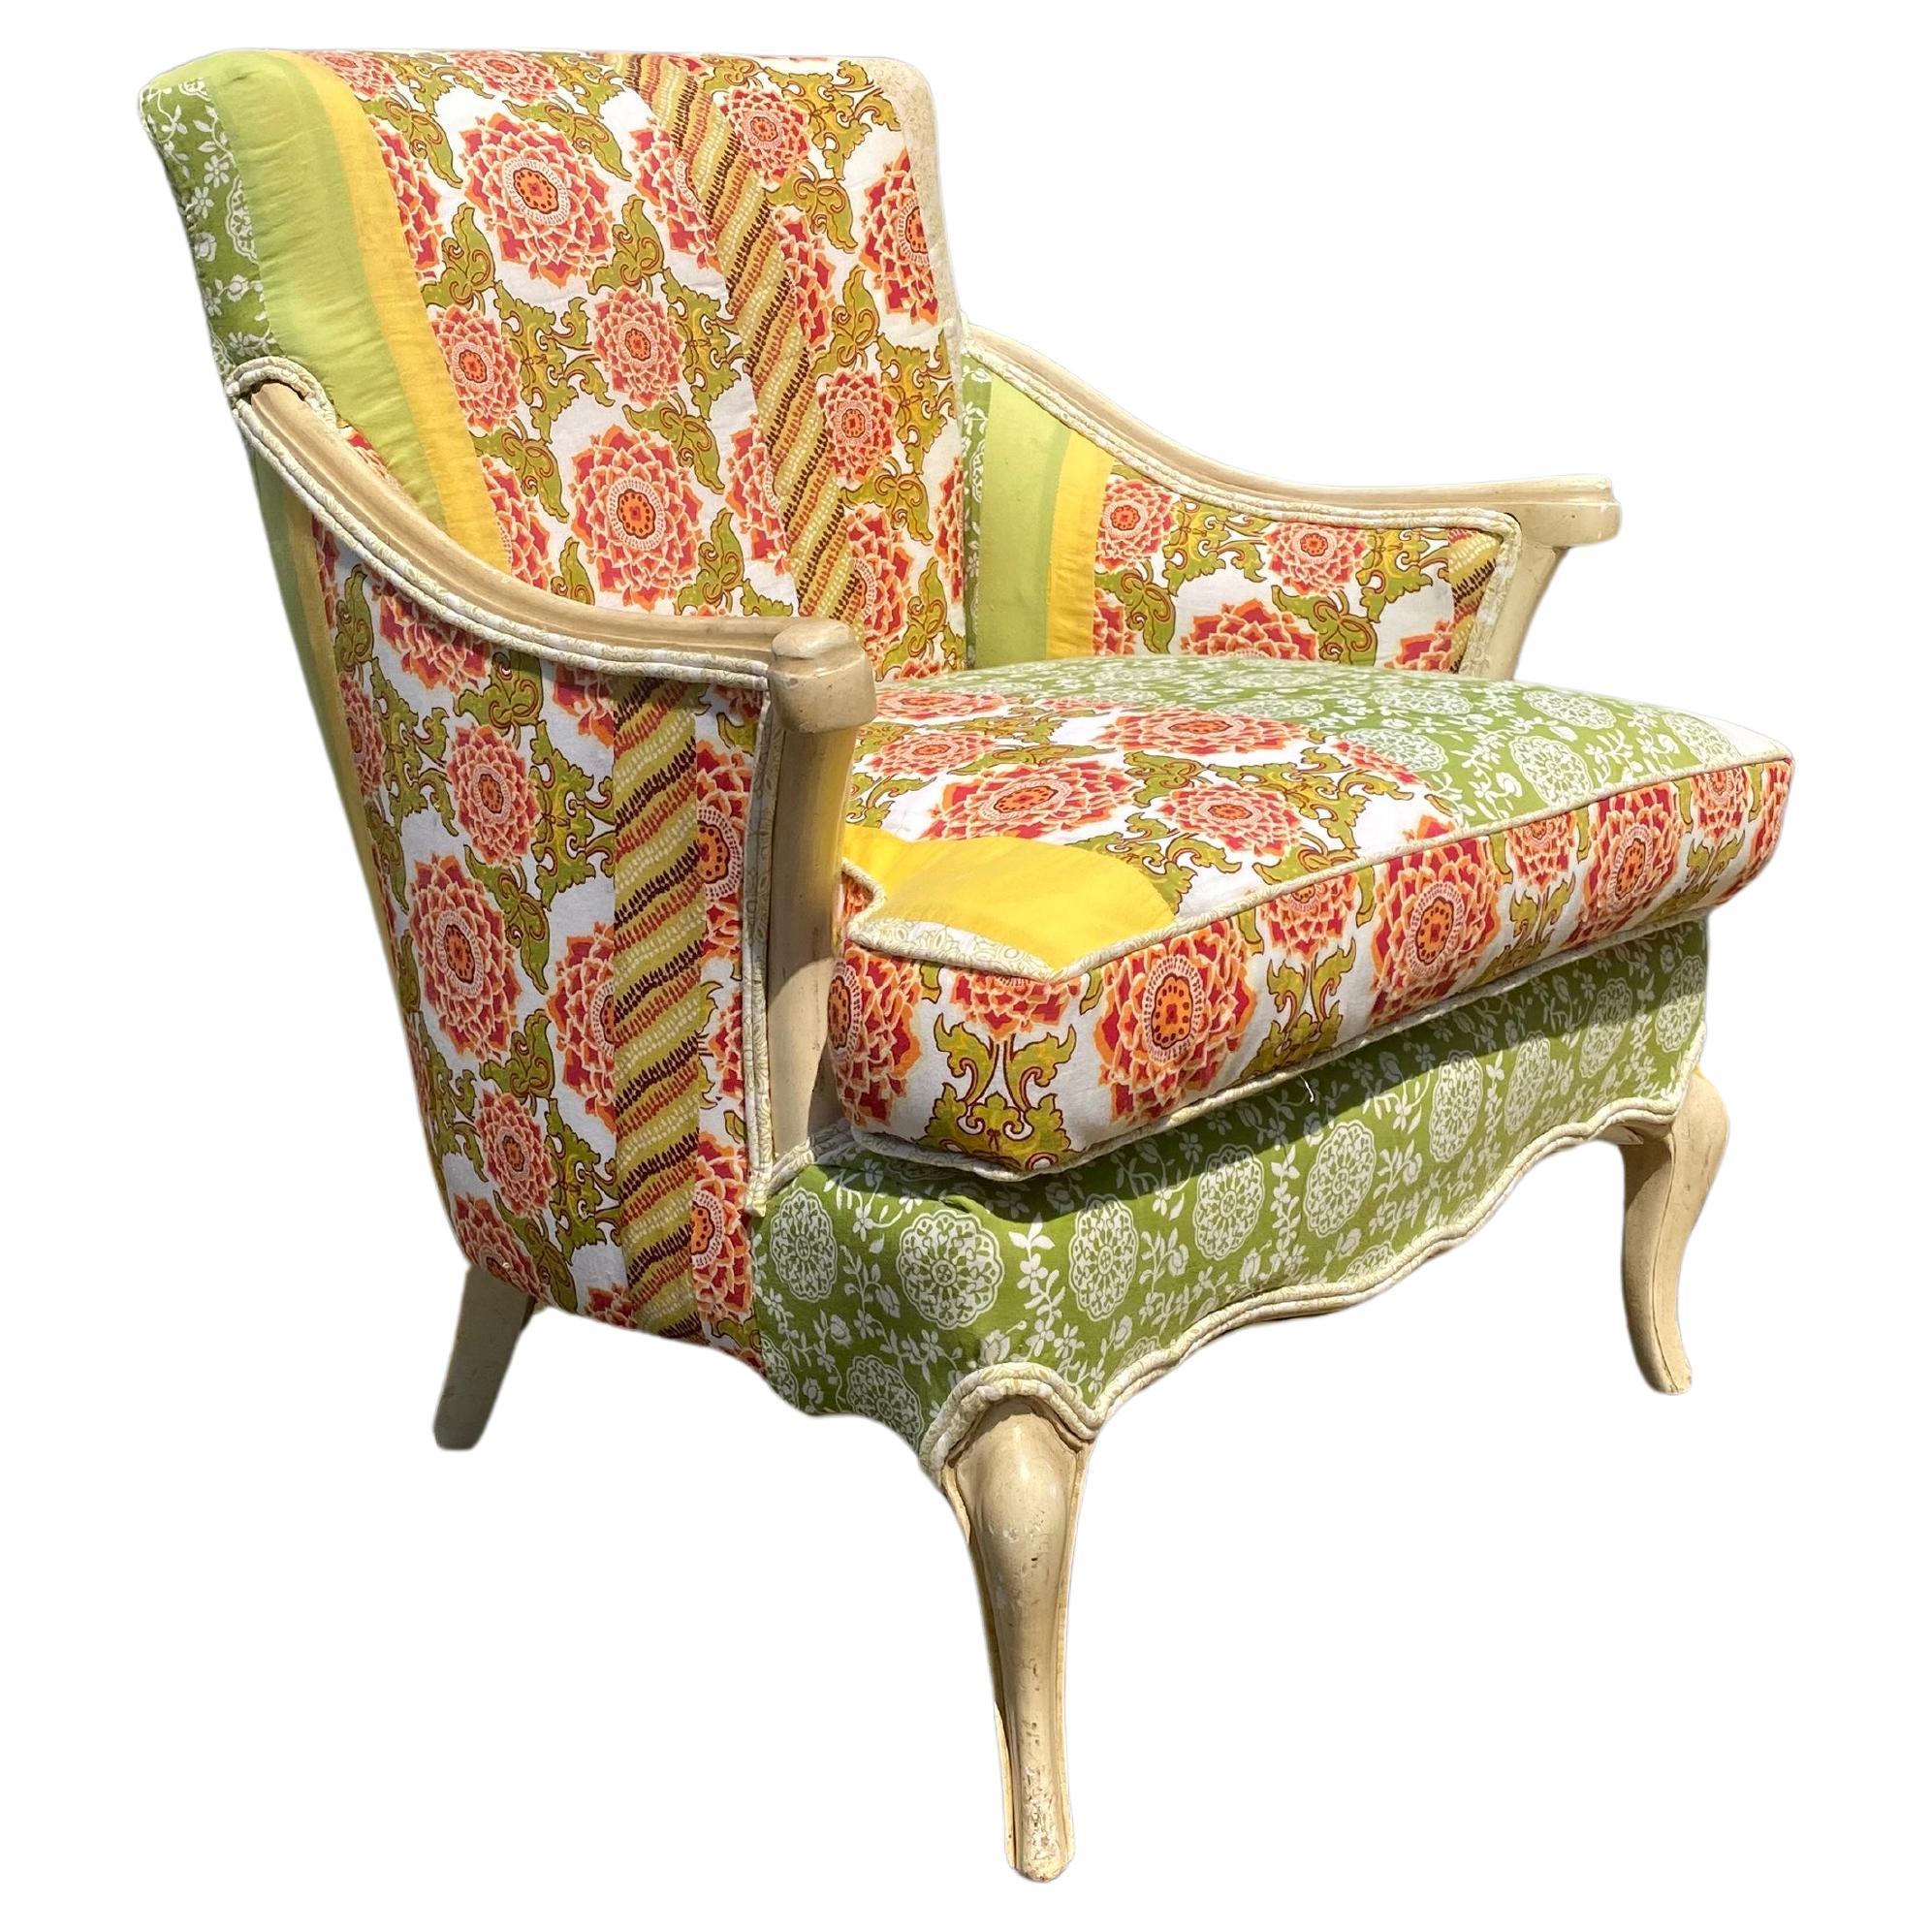 1950s French Colorful Floral Patchwork Chair   For Sale